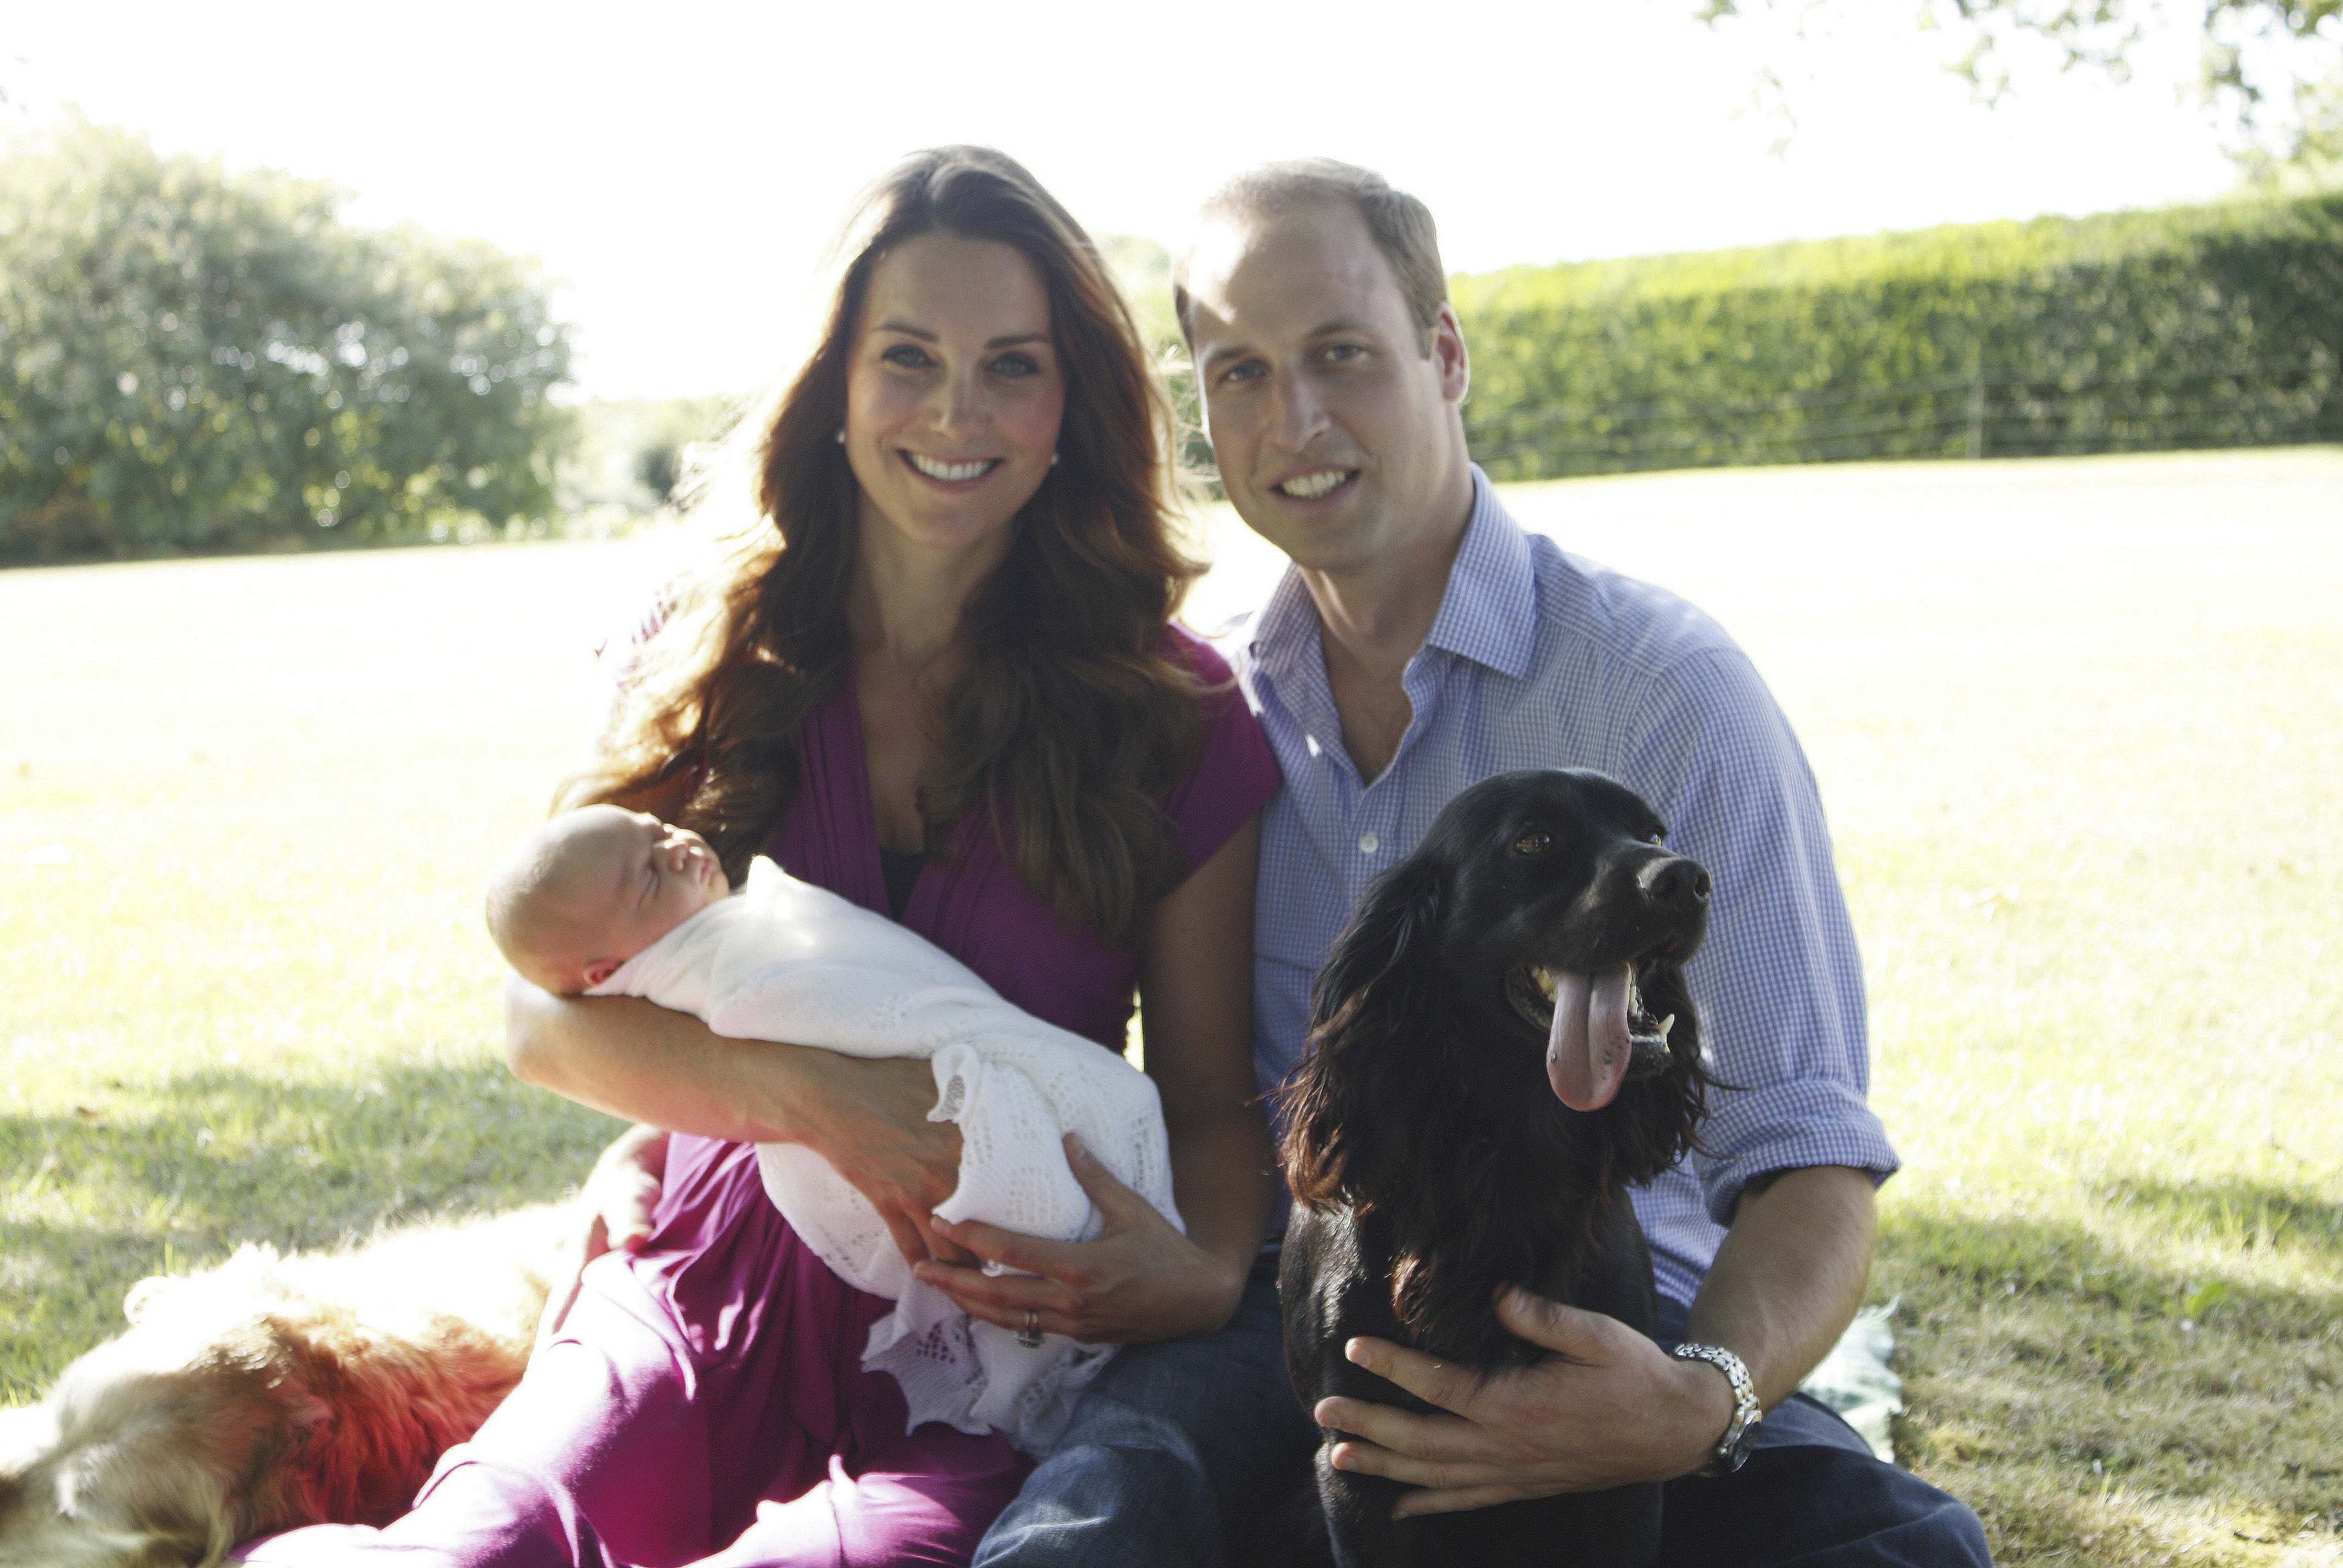 Britain's Prince William and his wife Catherine, Duchess of Cambridge, pose with their son Prince George in the garden of the Middleton family home in Bucklebury, southern England. Photo: Reuters